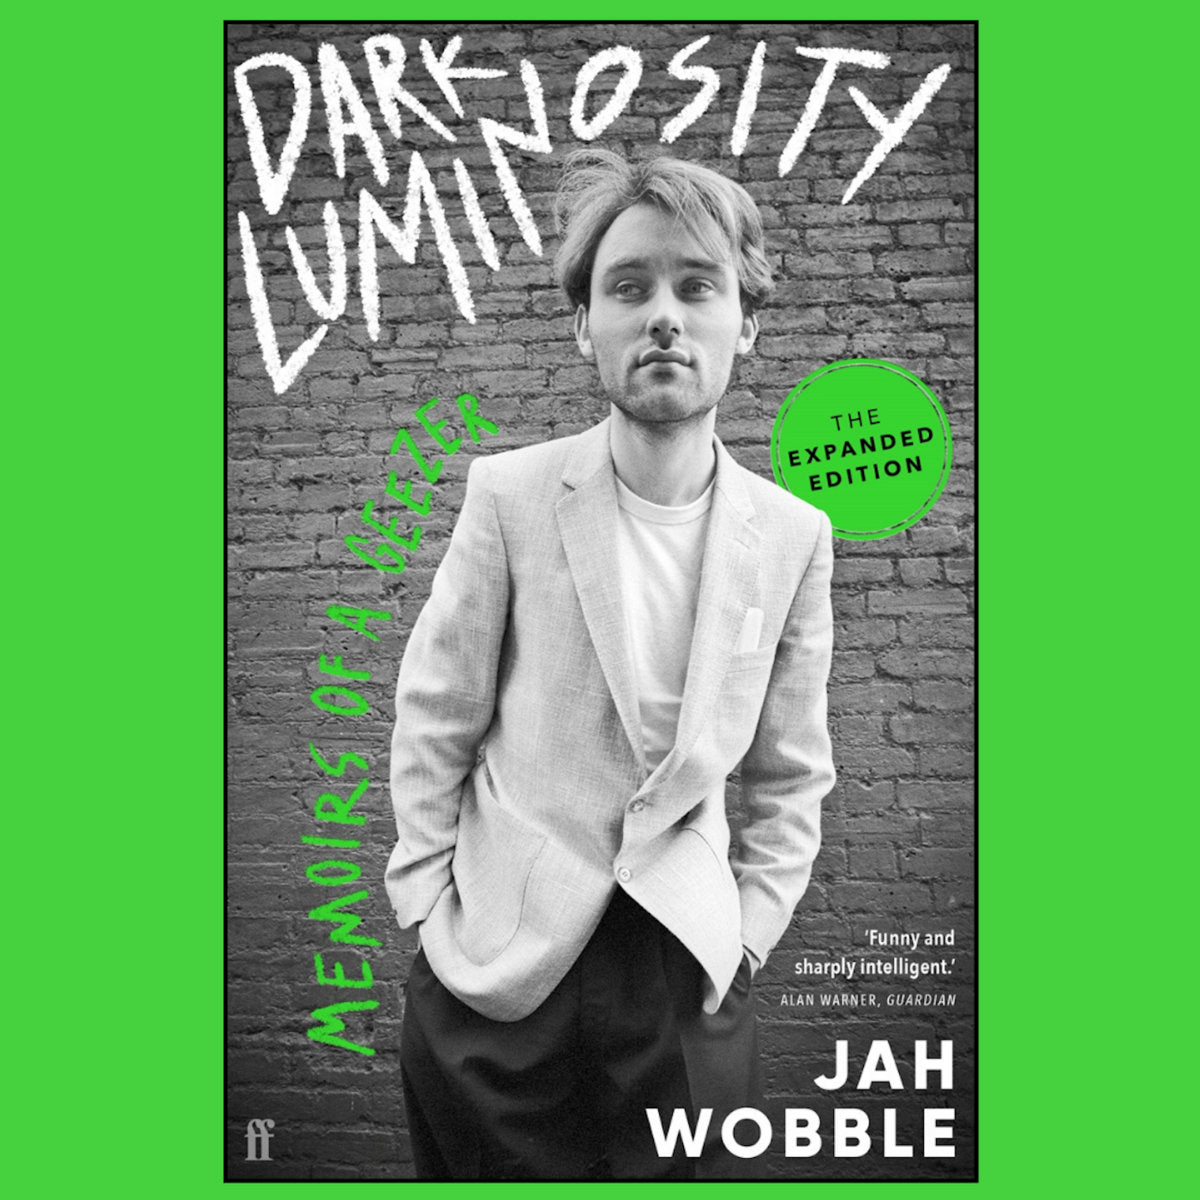 Dark Luminosity: Memoirs of a Geezer The Expanded Edition & Bookplate Insert Signed By Jah Wobble [Limited Copies]